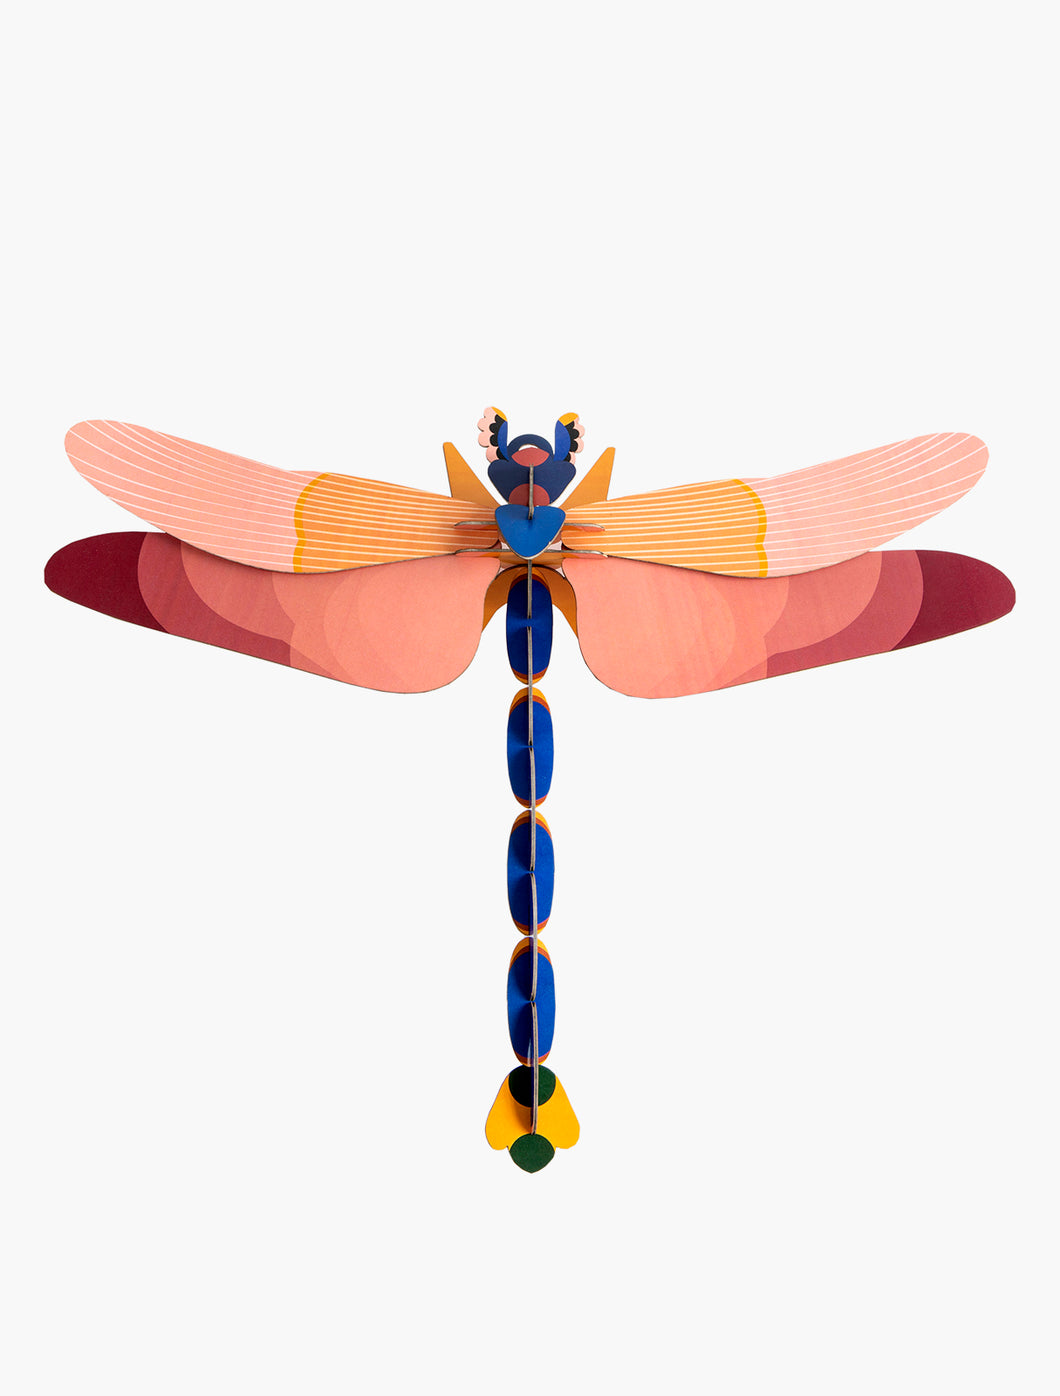 Giant Pink Dragonfly 3D Wall Art